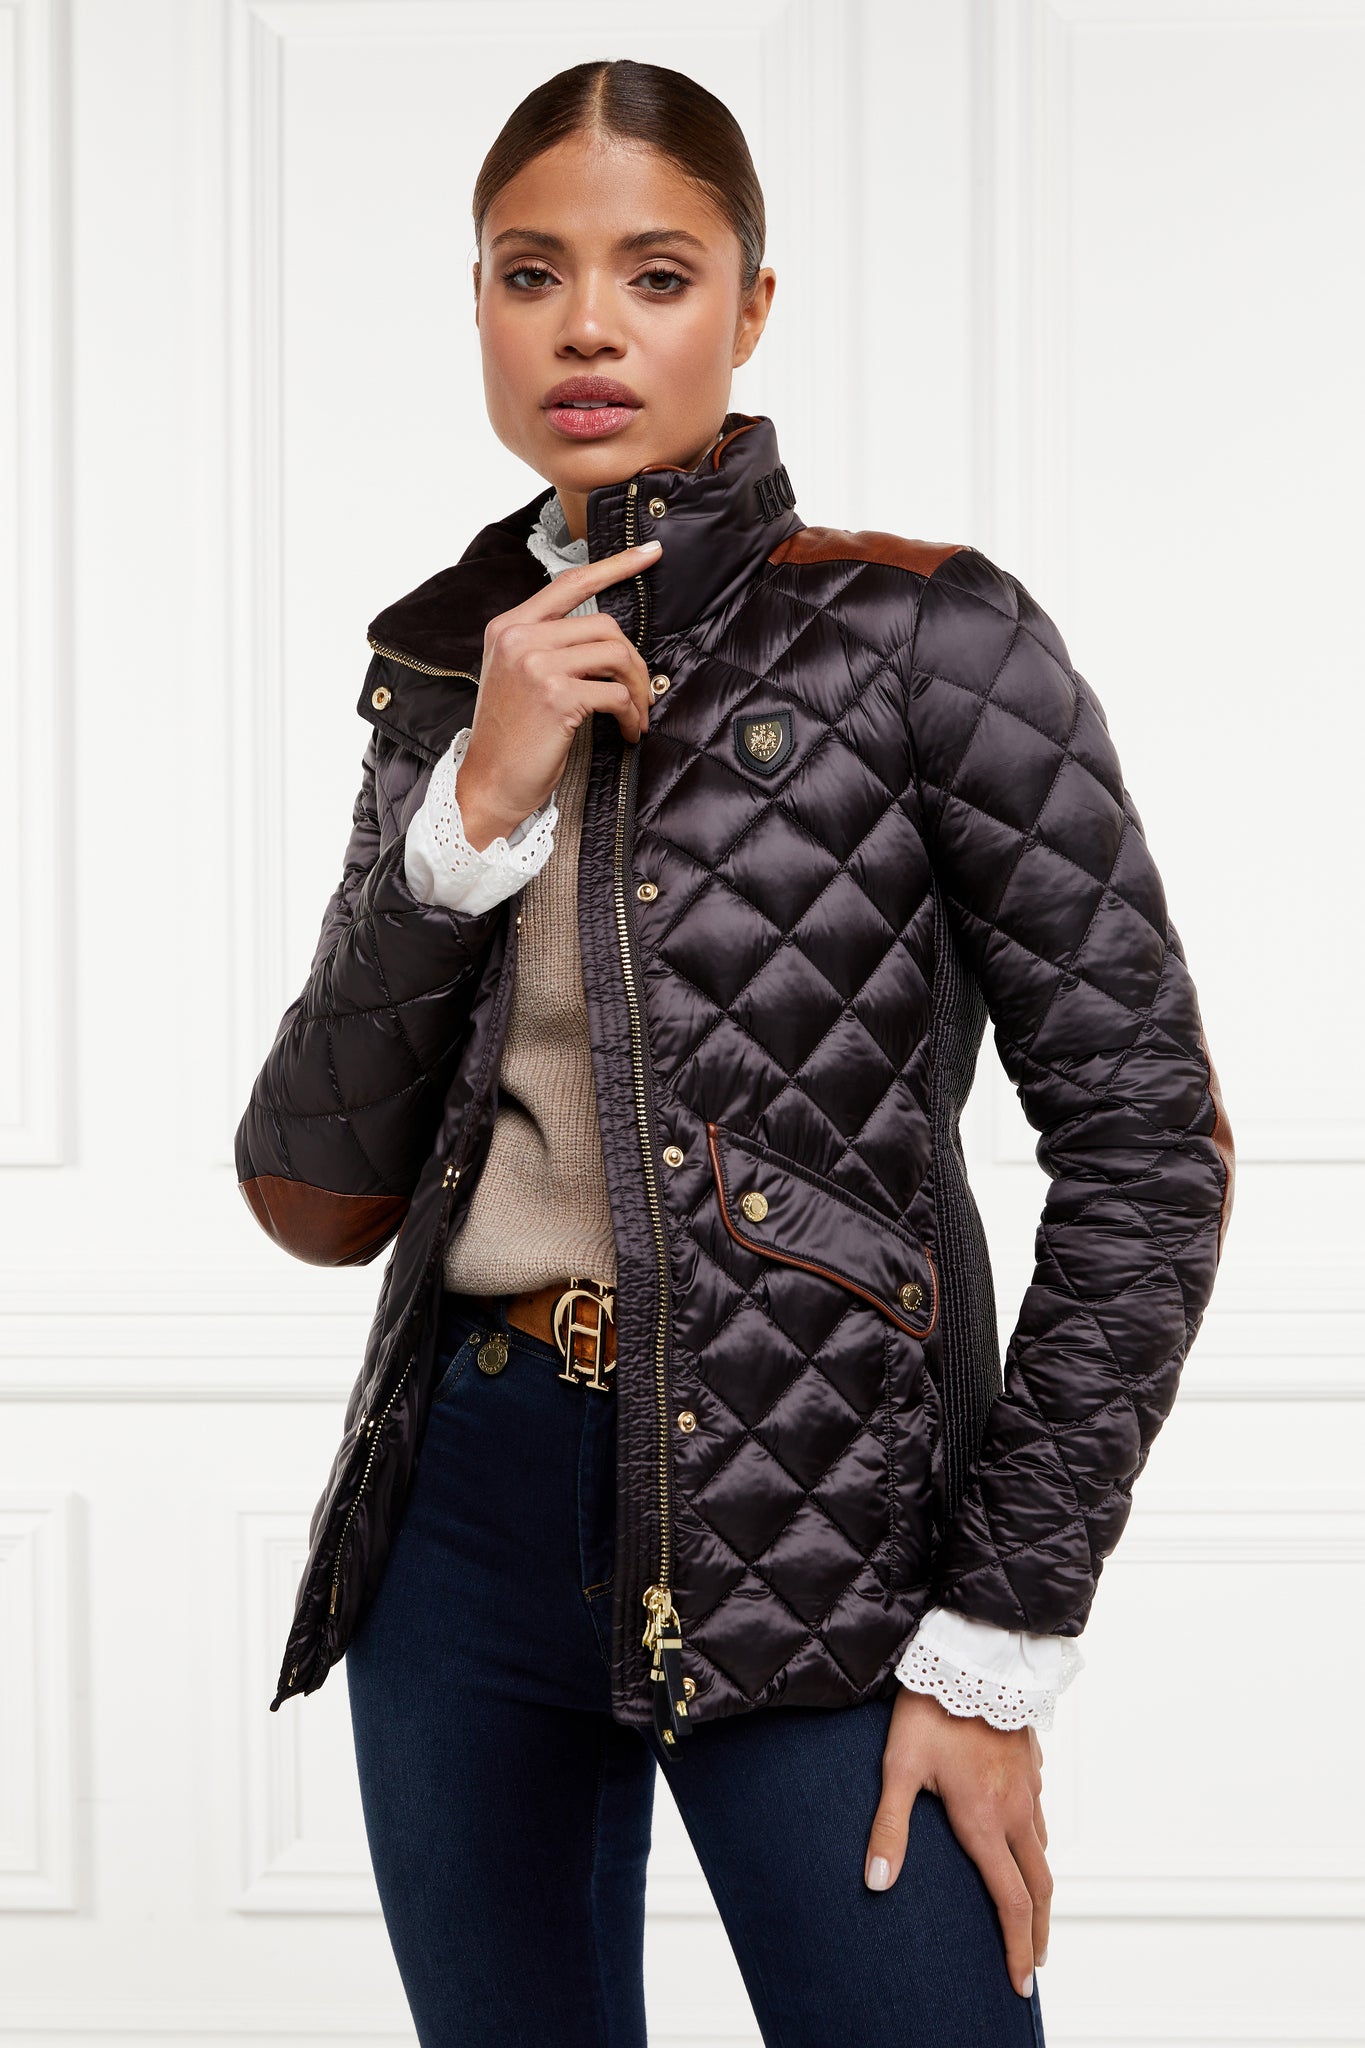 womens diamond quilted chocolate jacket with contrast tan leather elbow and shoulder pads large front pockets and shirred side panels